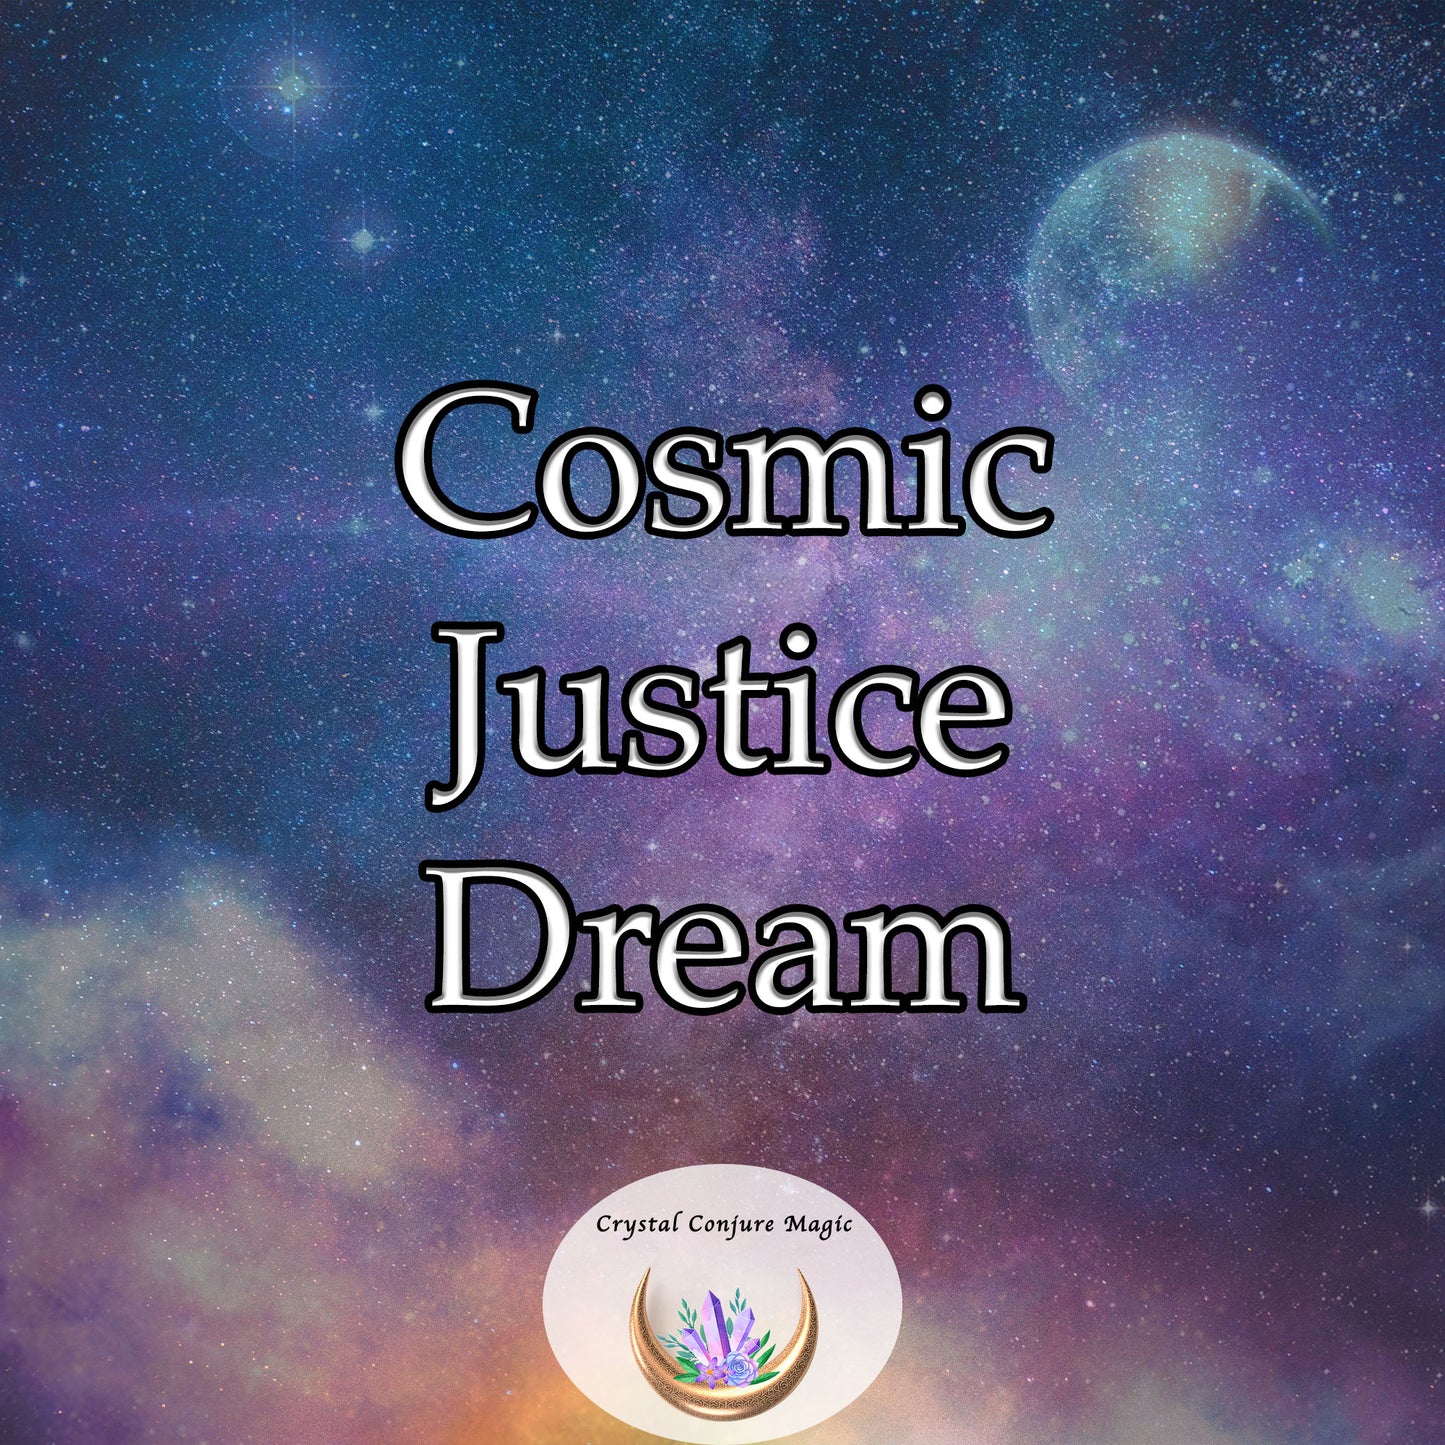 Cosmic Justice Dream - bring balance and righteousness to your life